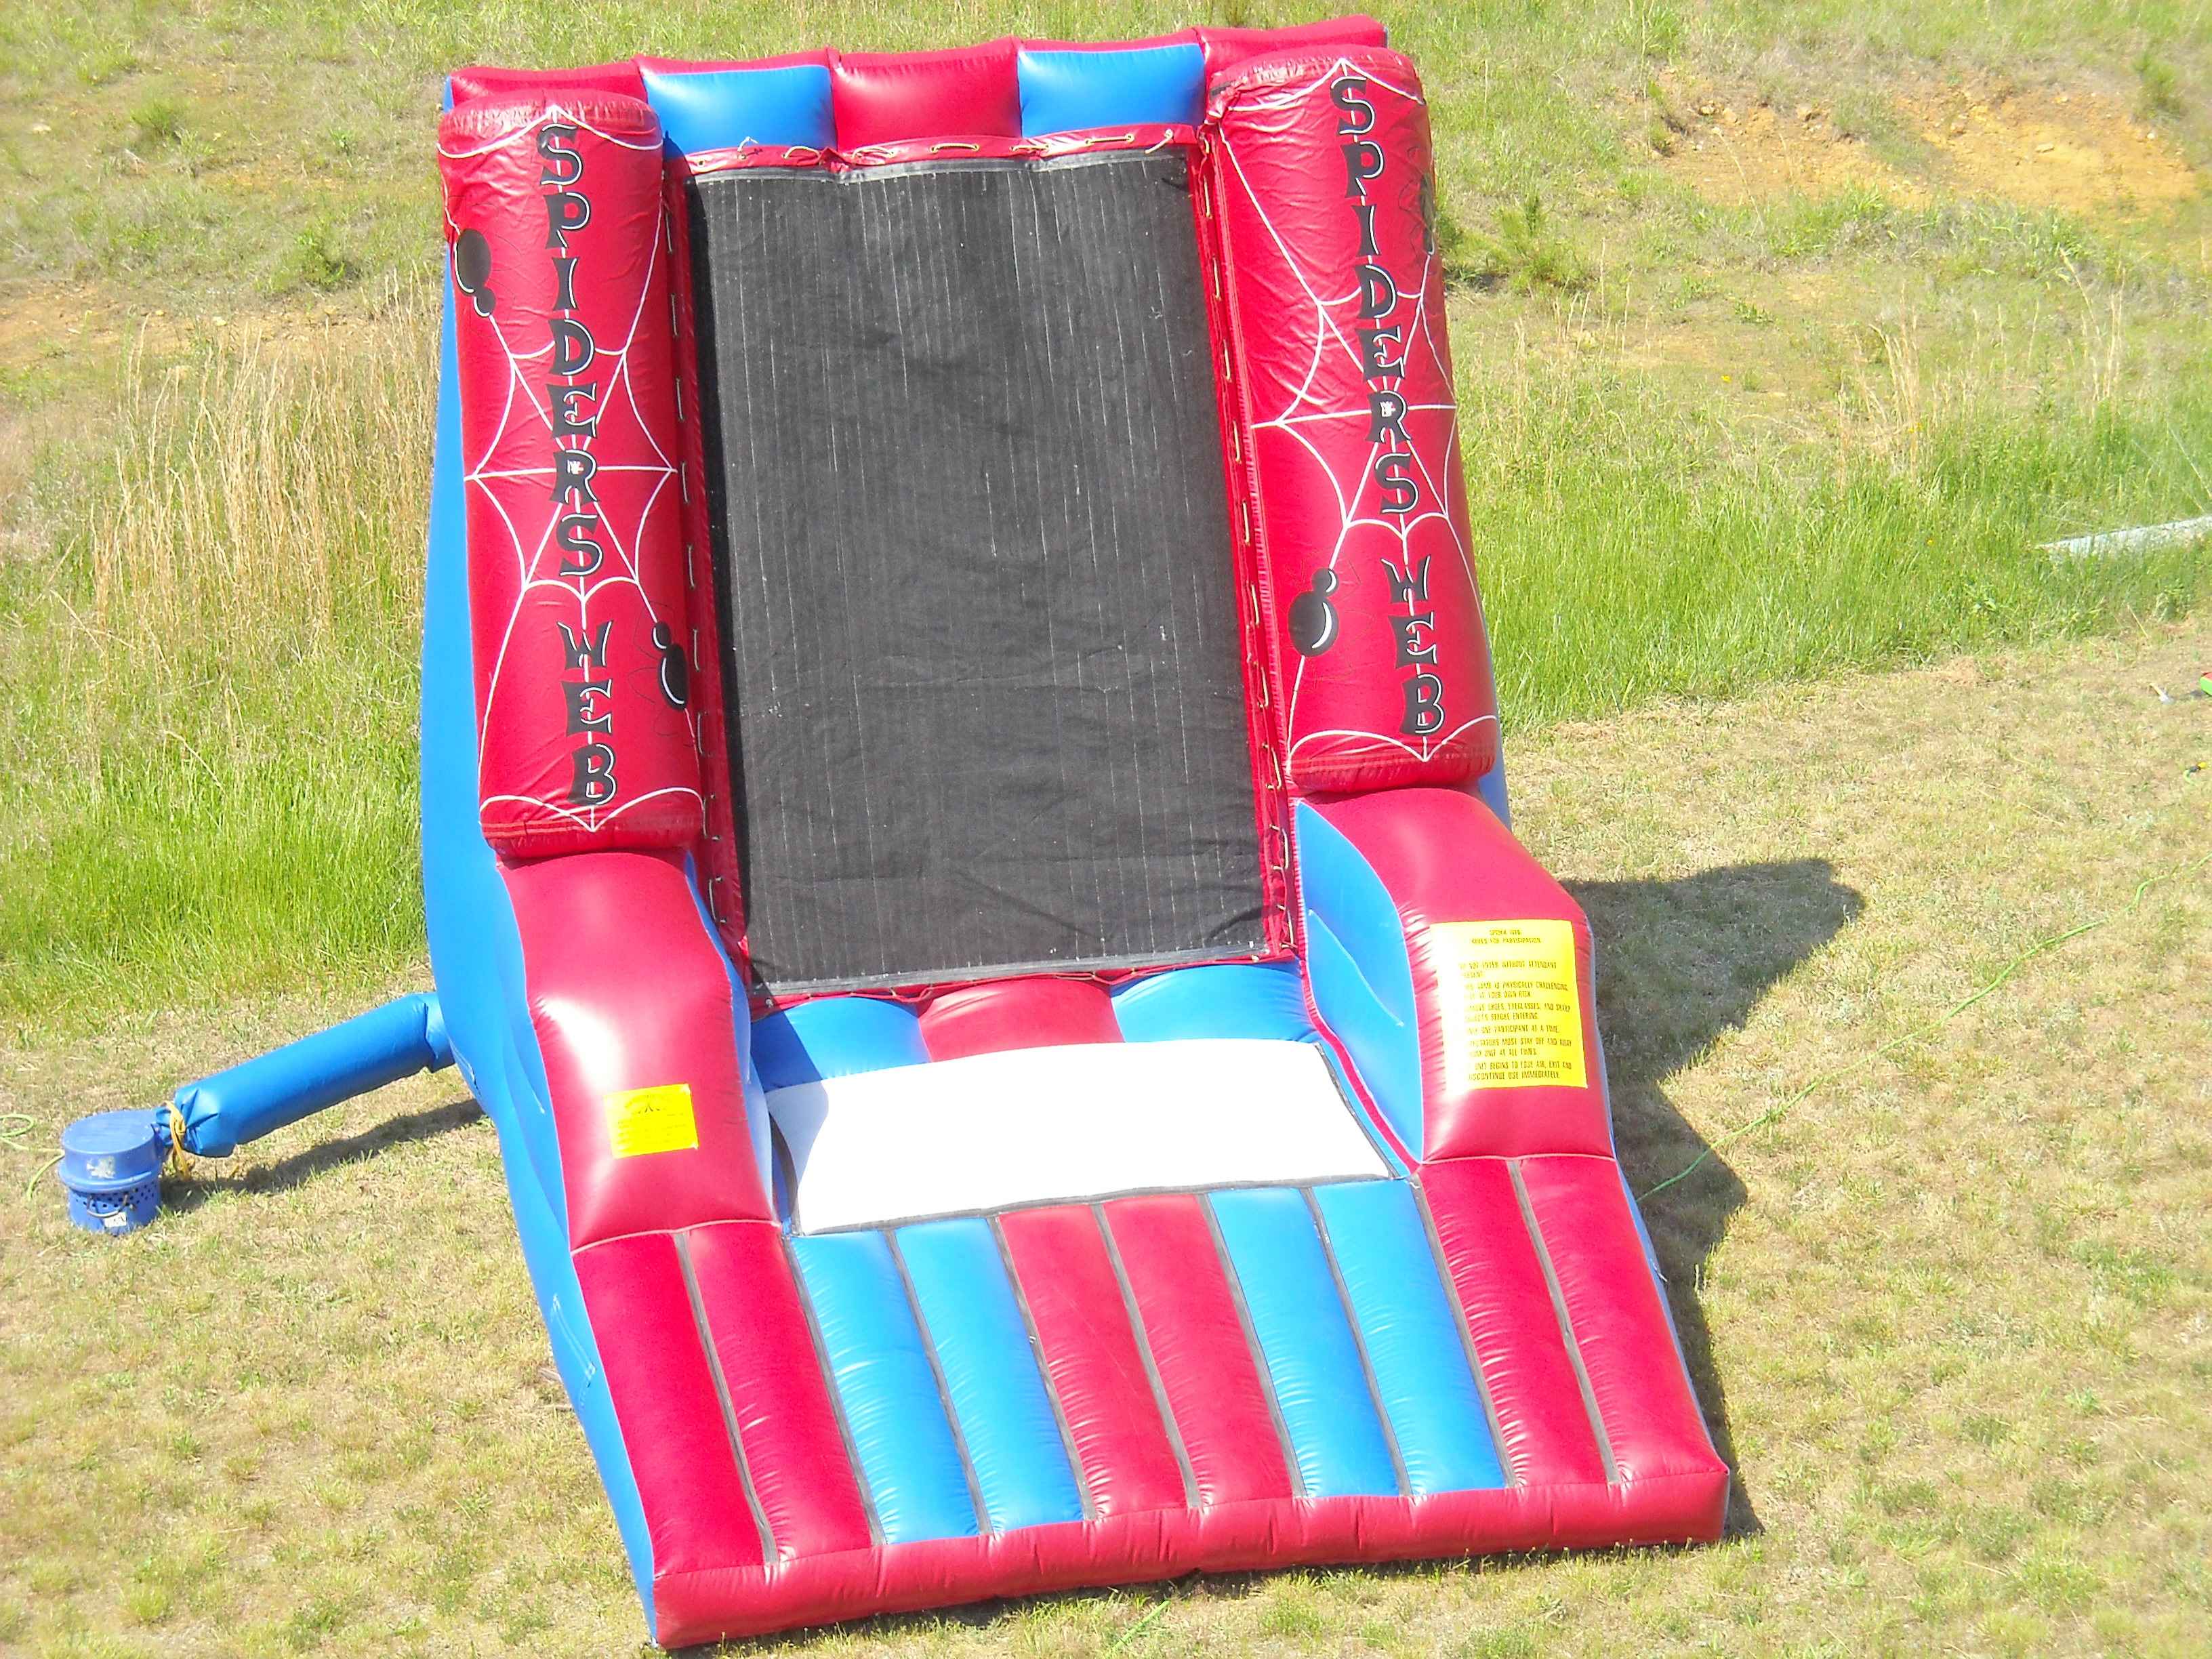 Velcro Wall - Ultimate Inflatables American Fork UT